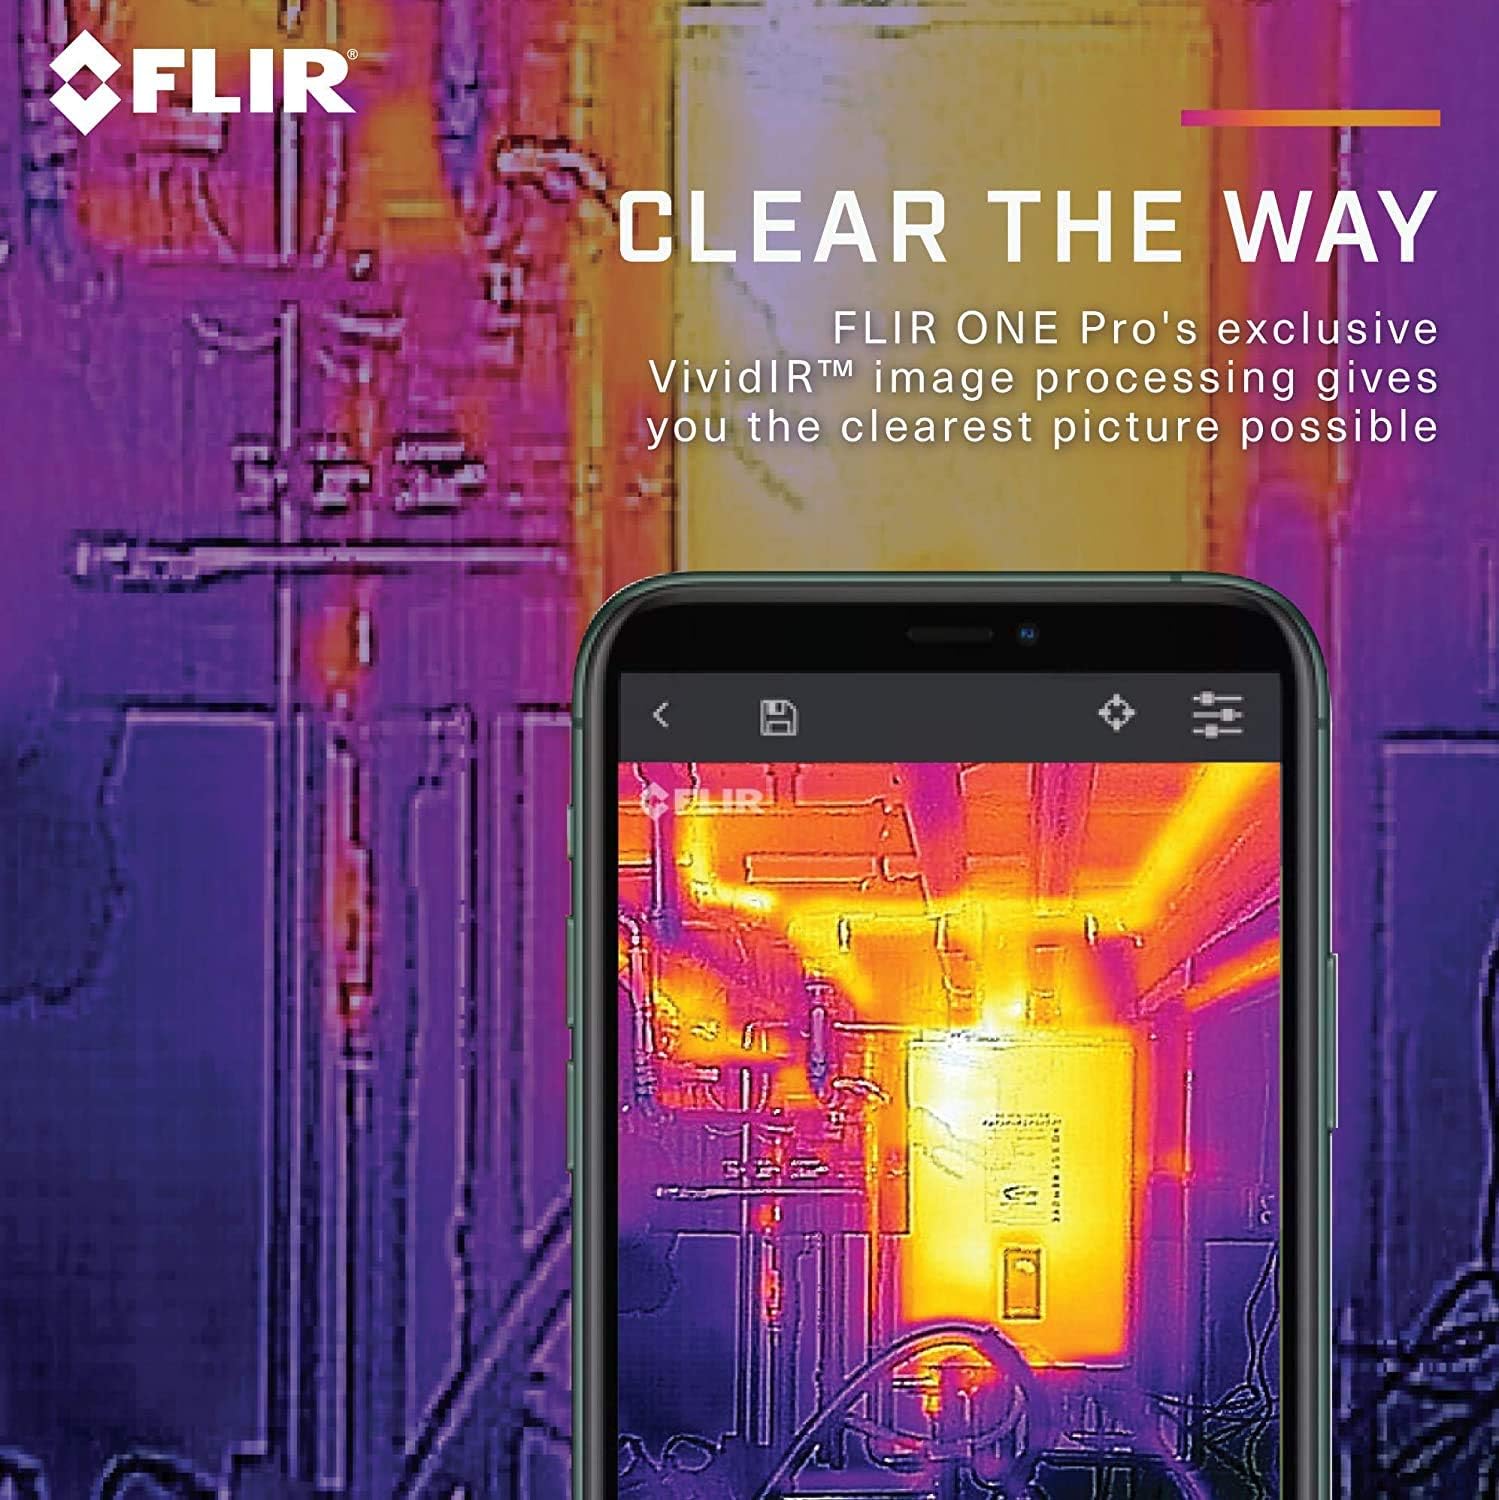 FLIR ONE Gen 3  iOS  Thermal Camera for Smart Phones  wit - New York - Albany ID1554469 3